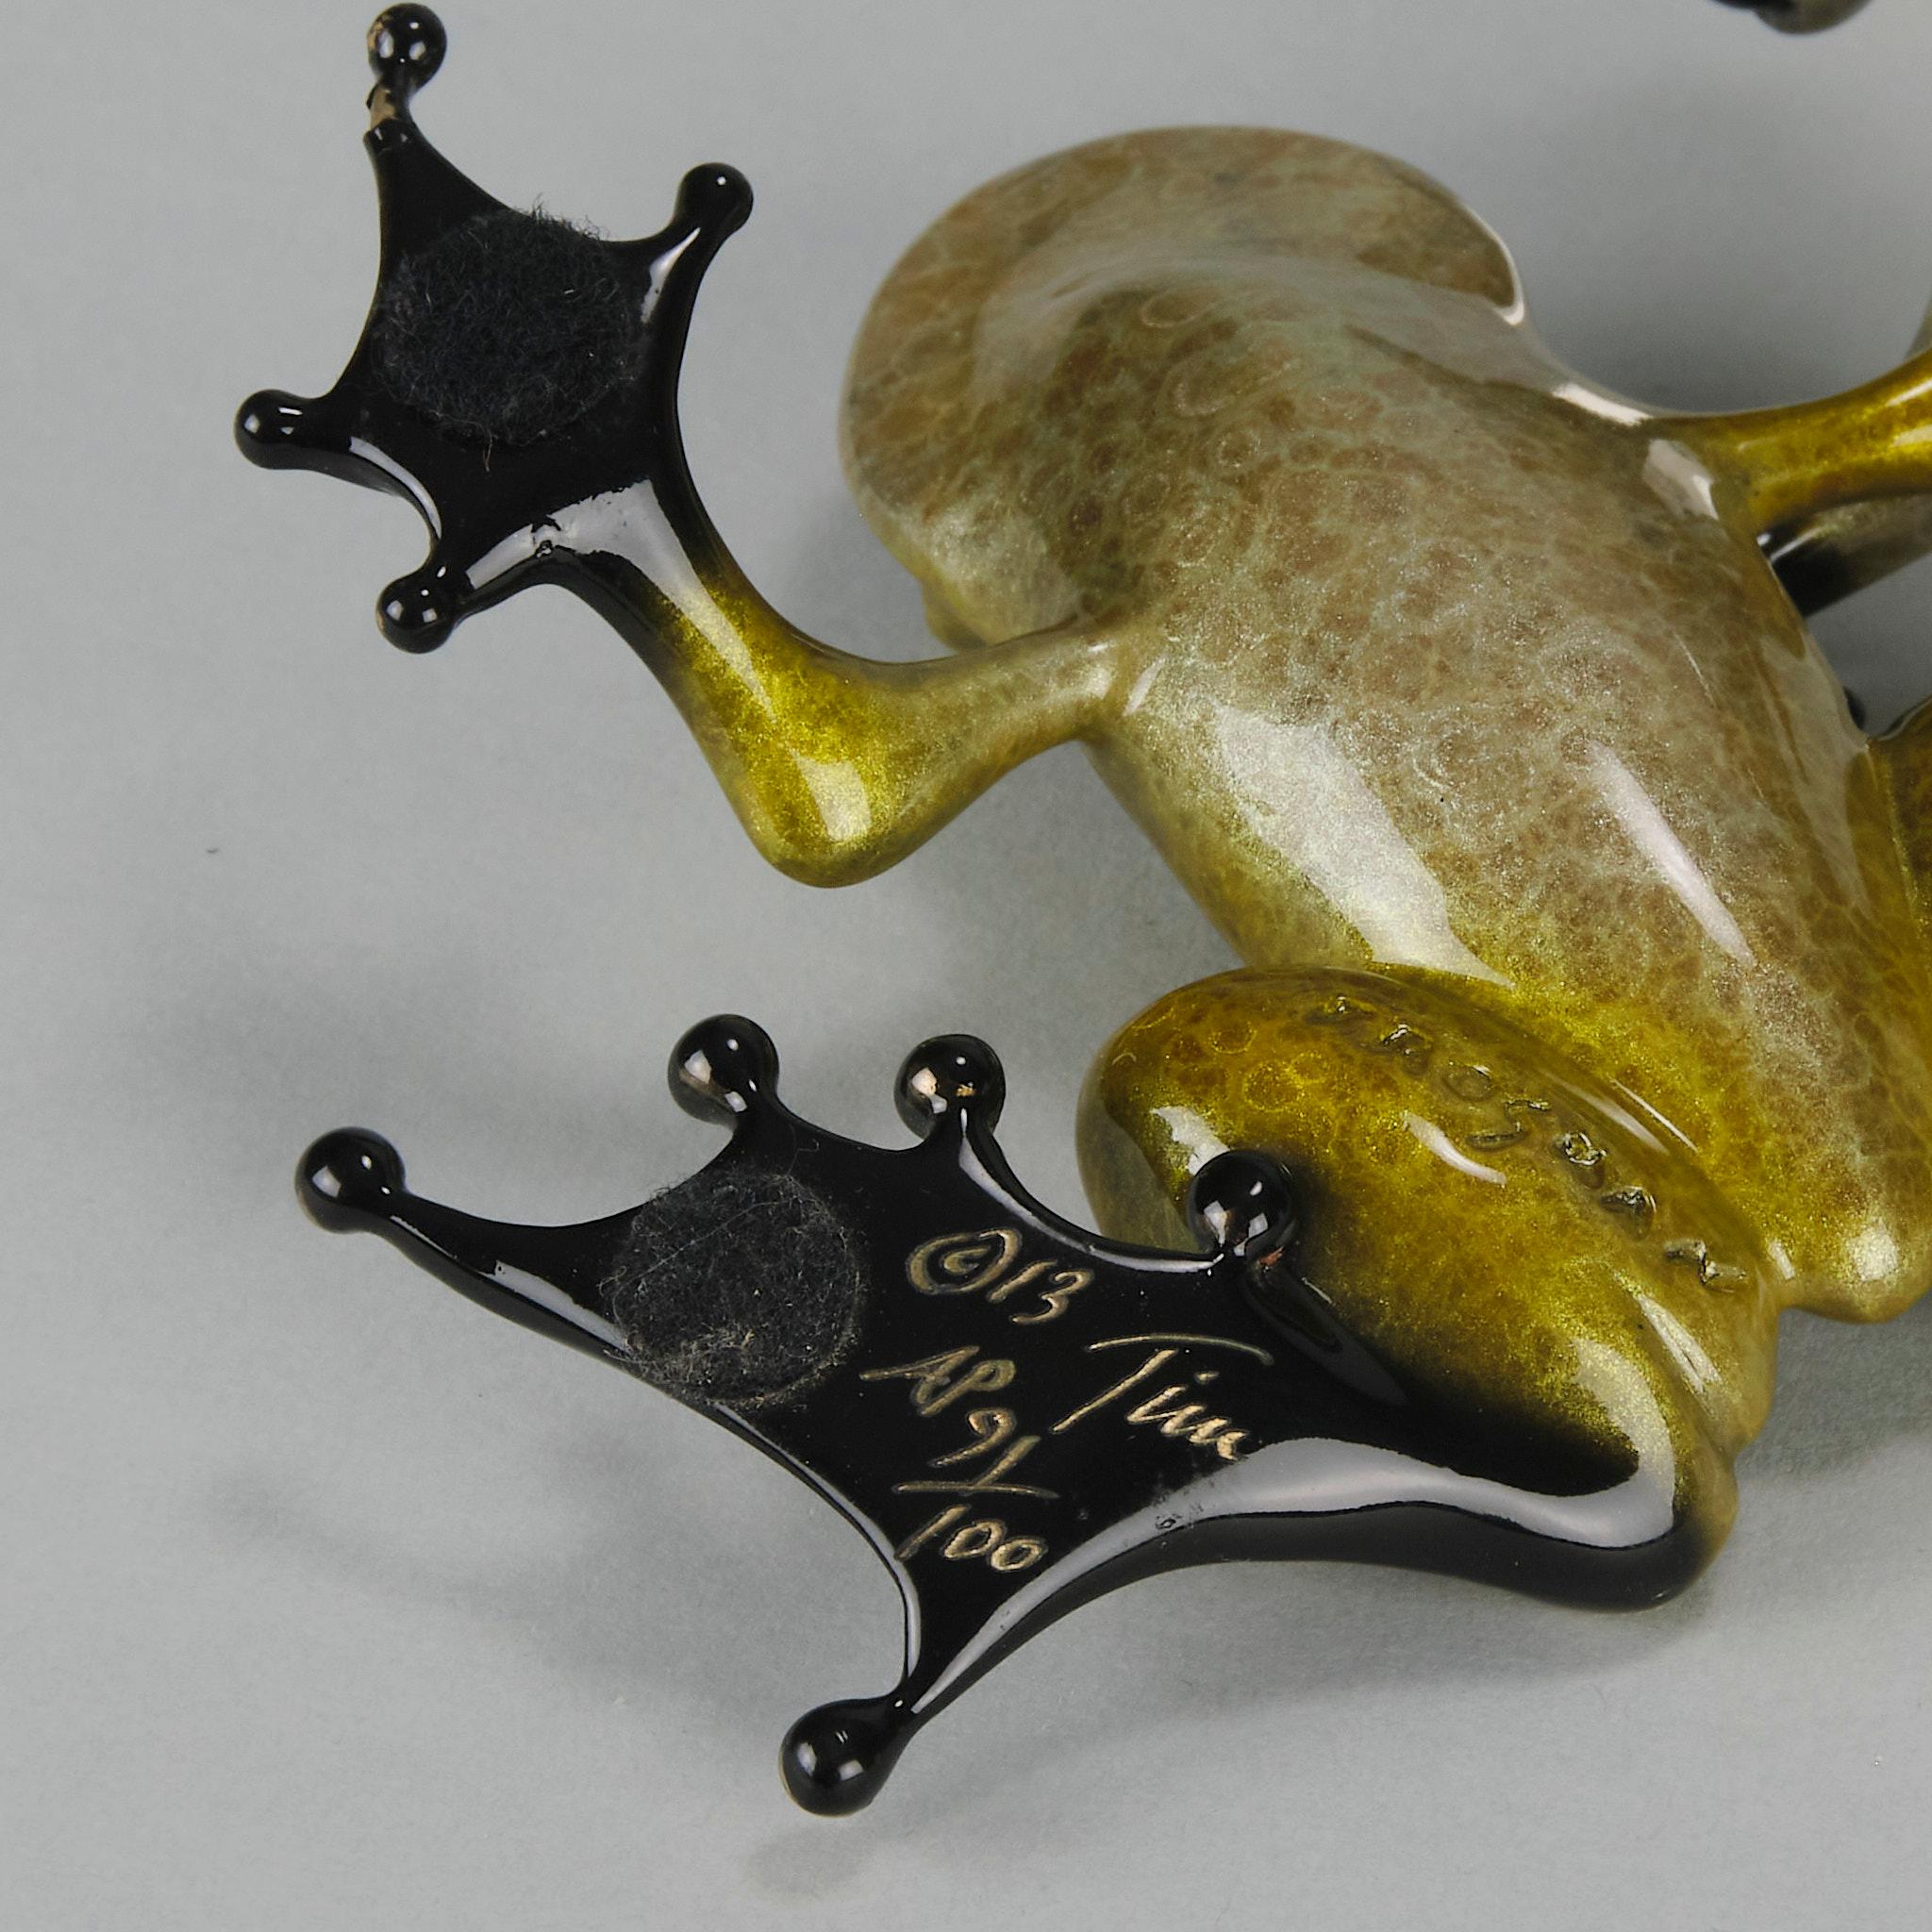 Limited Edition Bronze Frogs entitled 